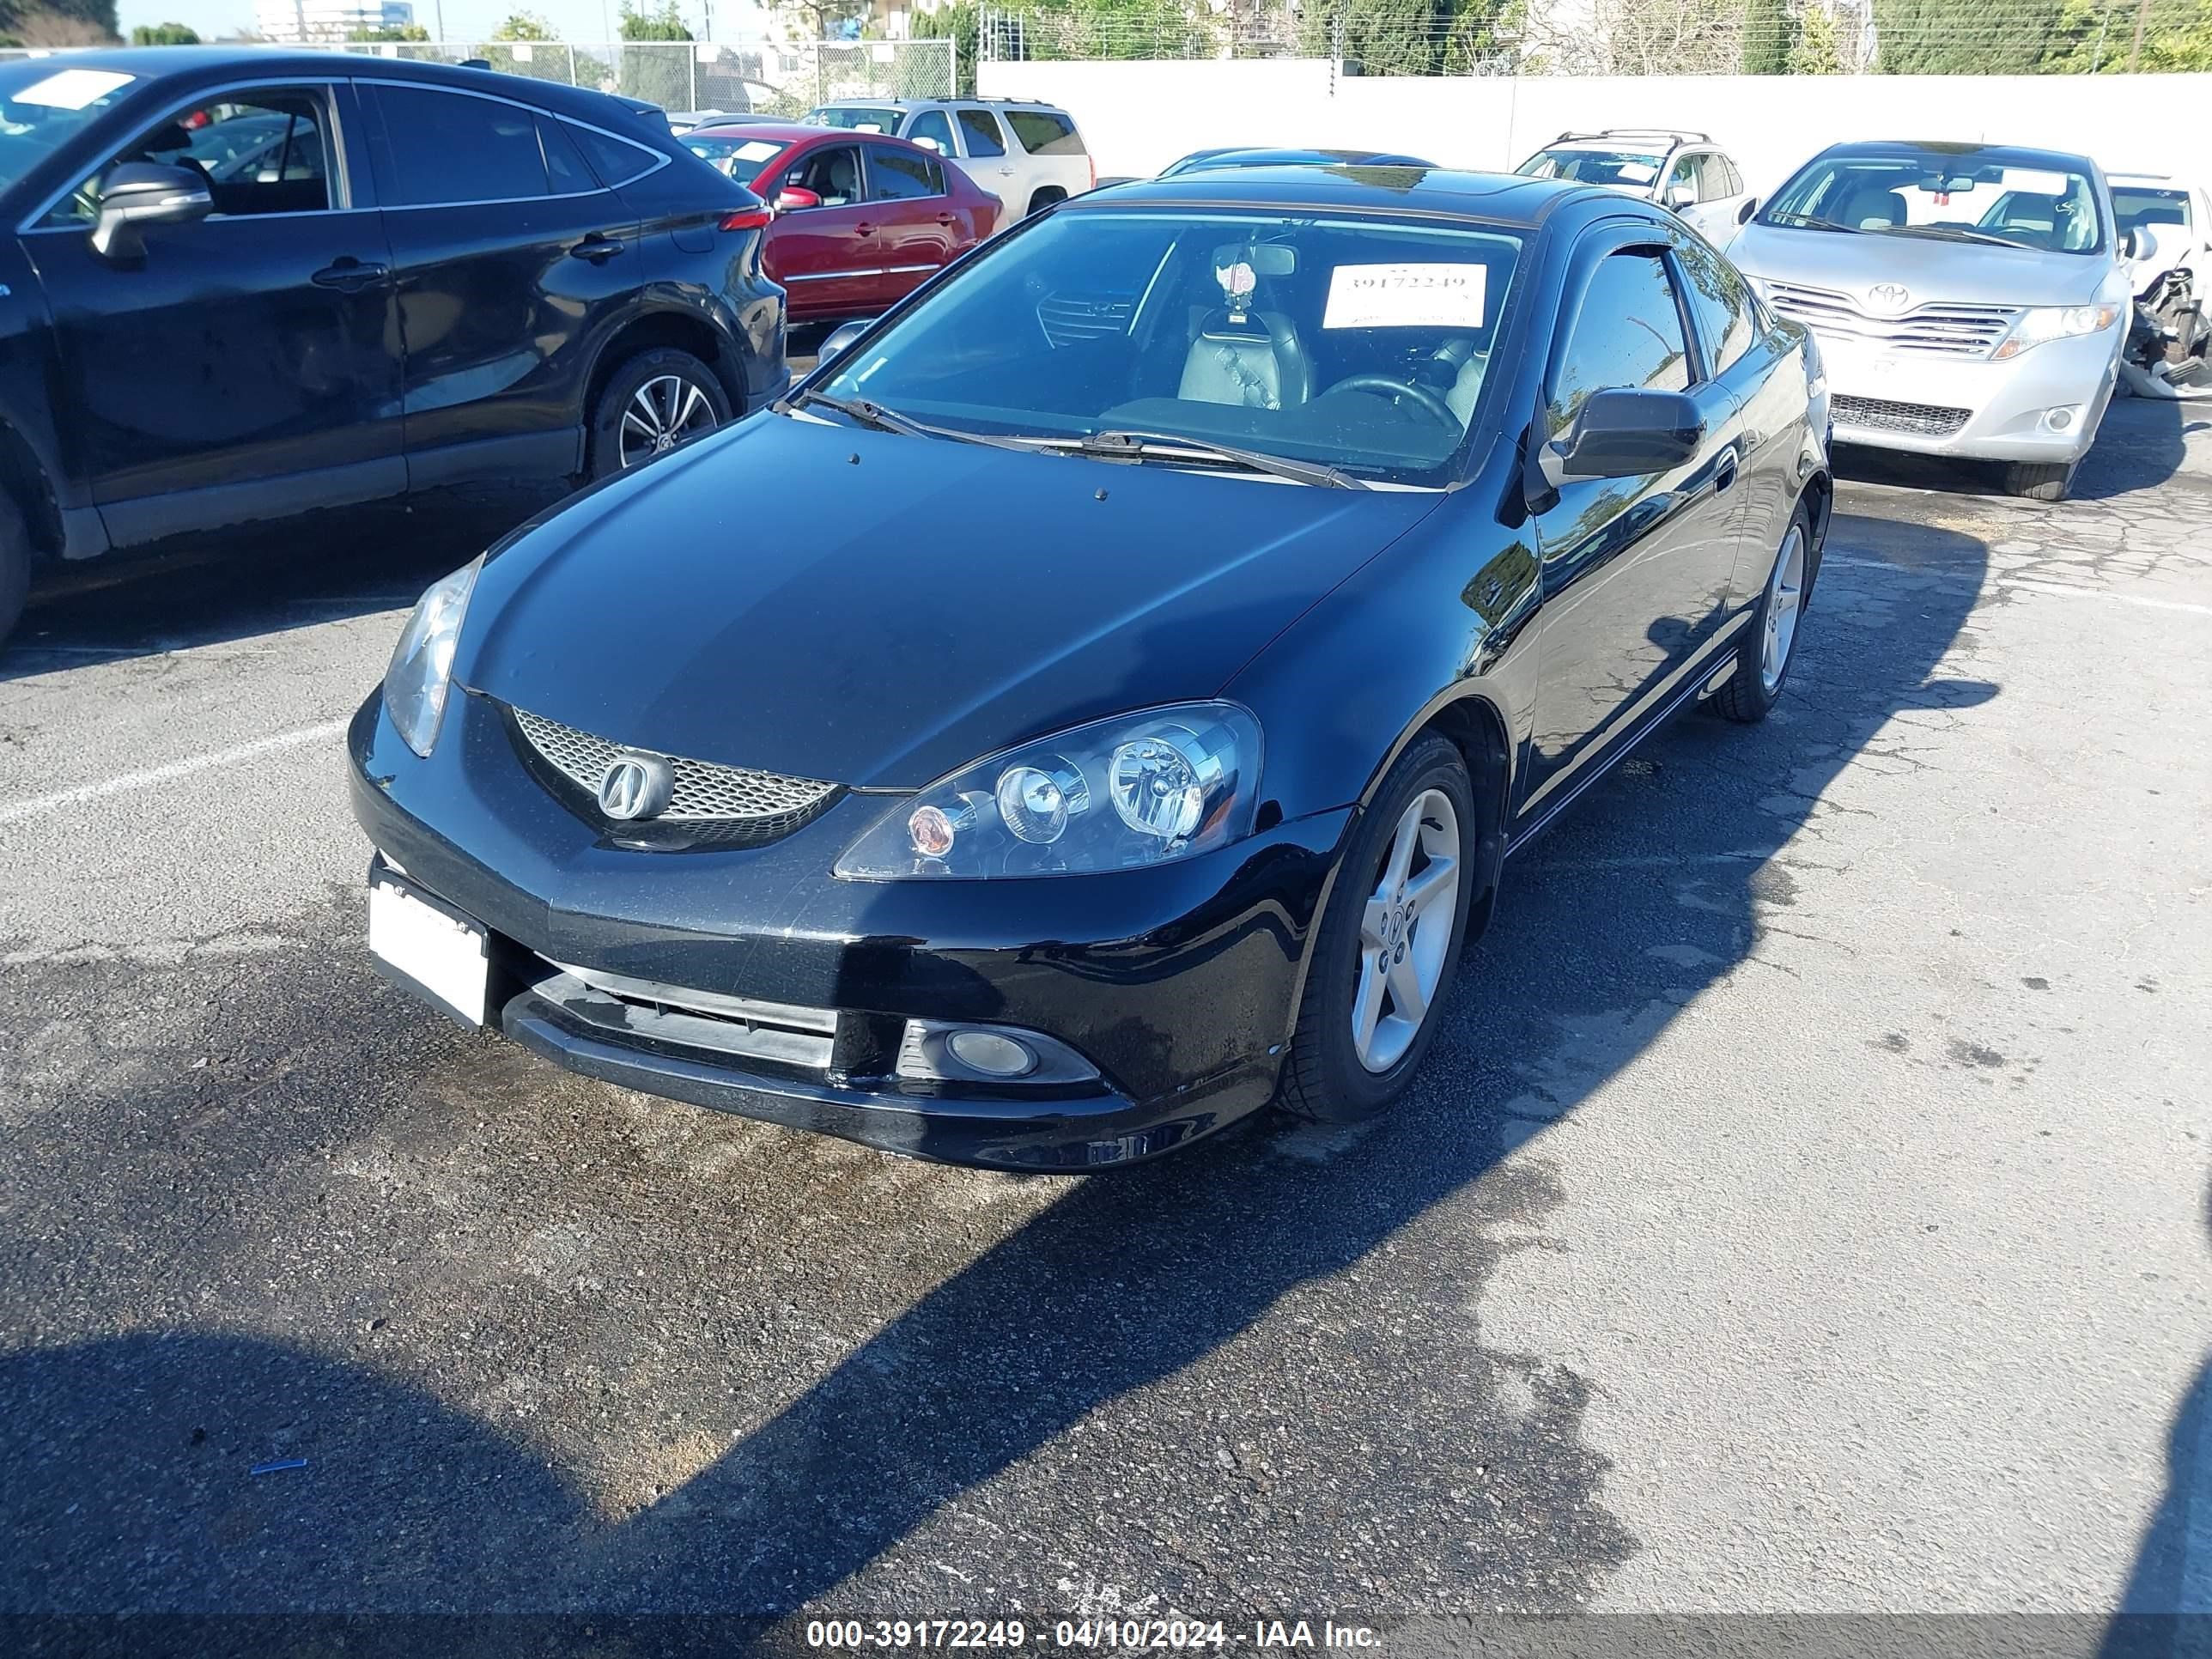 VIN: JH4DC54895S012857 ACURA RSX 2005